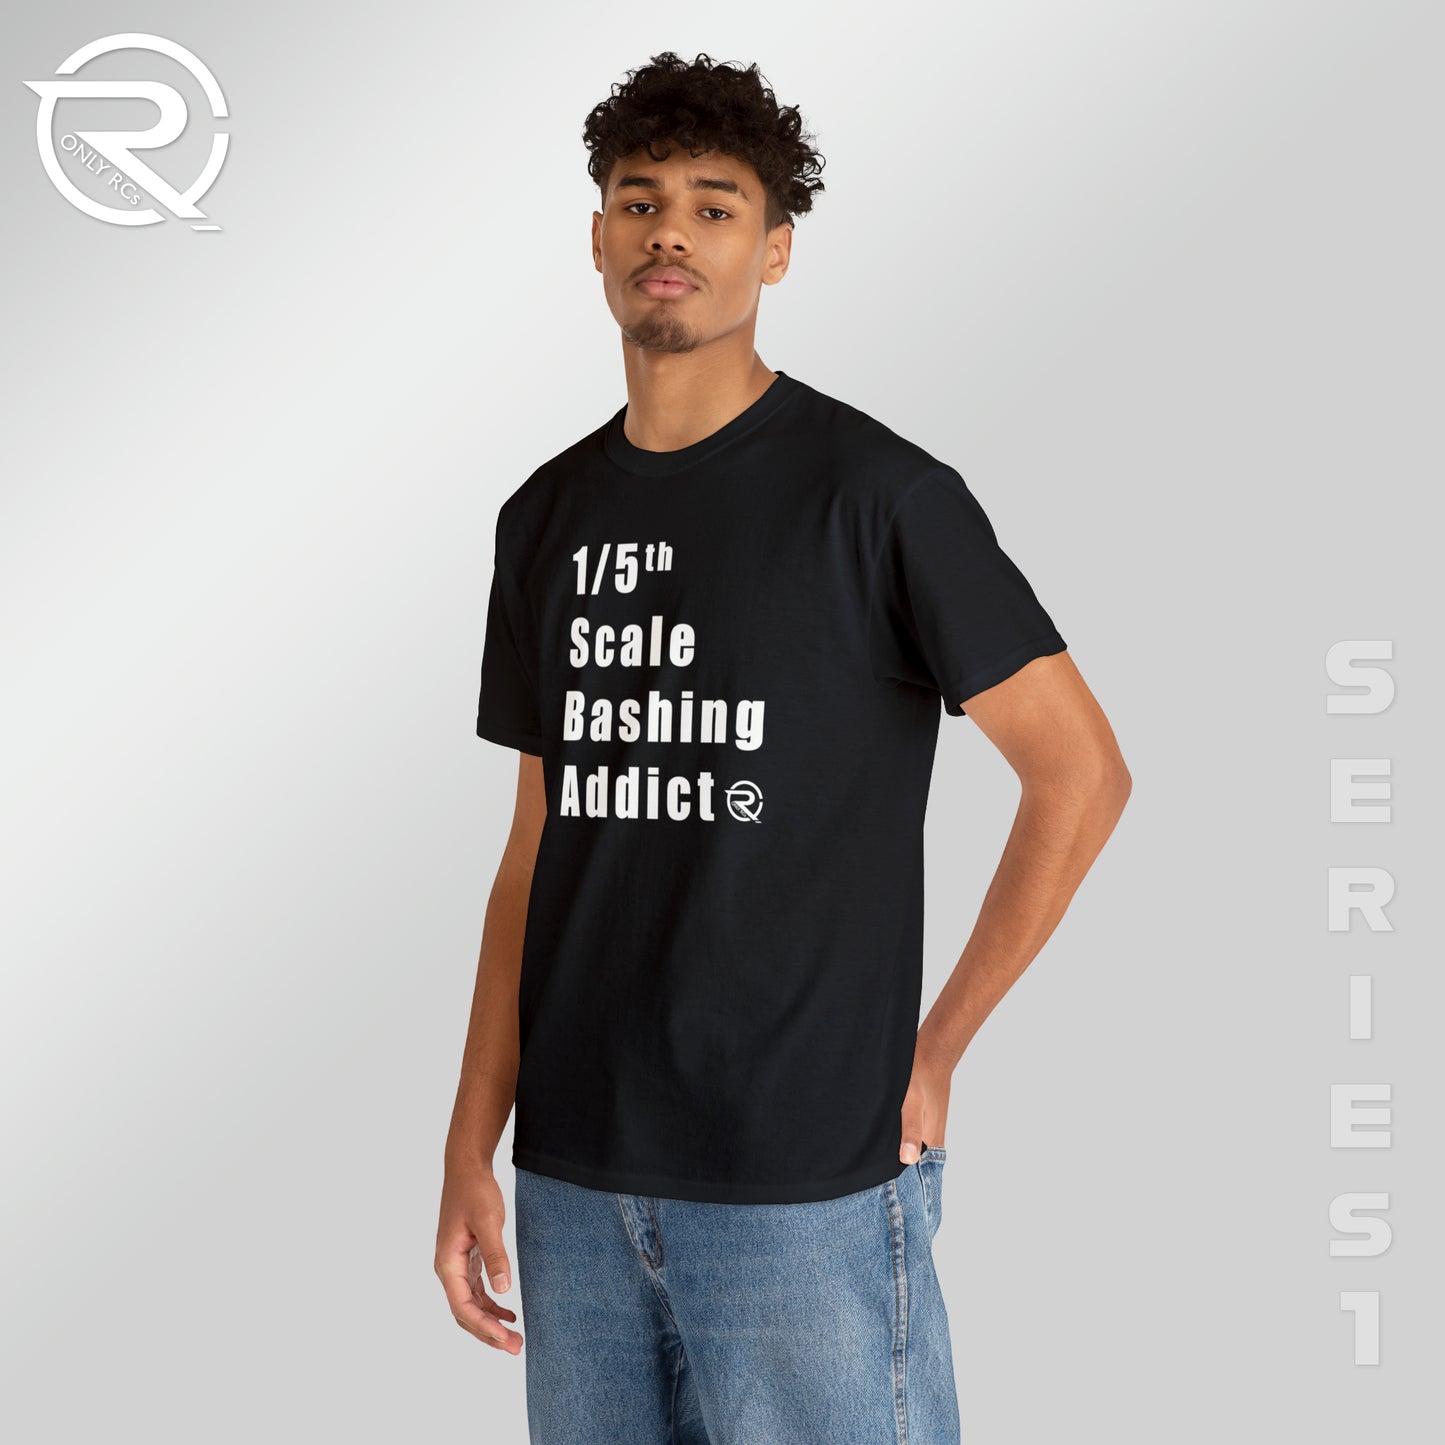 OnlyRCs - 1/5th Scale Bashing Addict Heavy Cotton Tee - Series 1